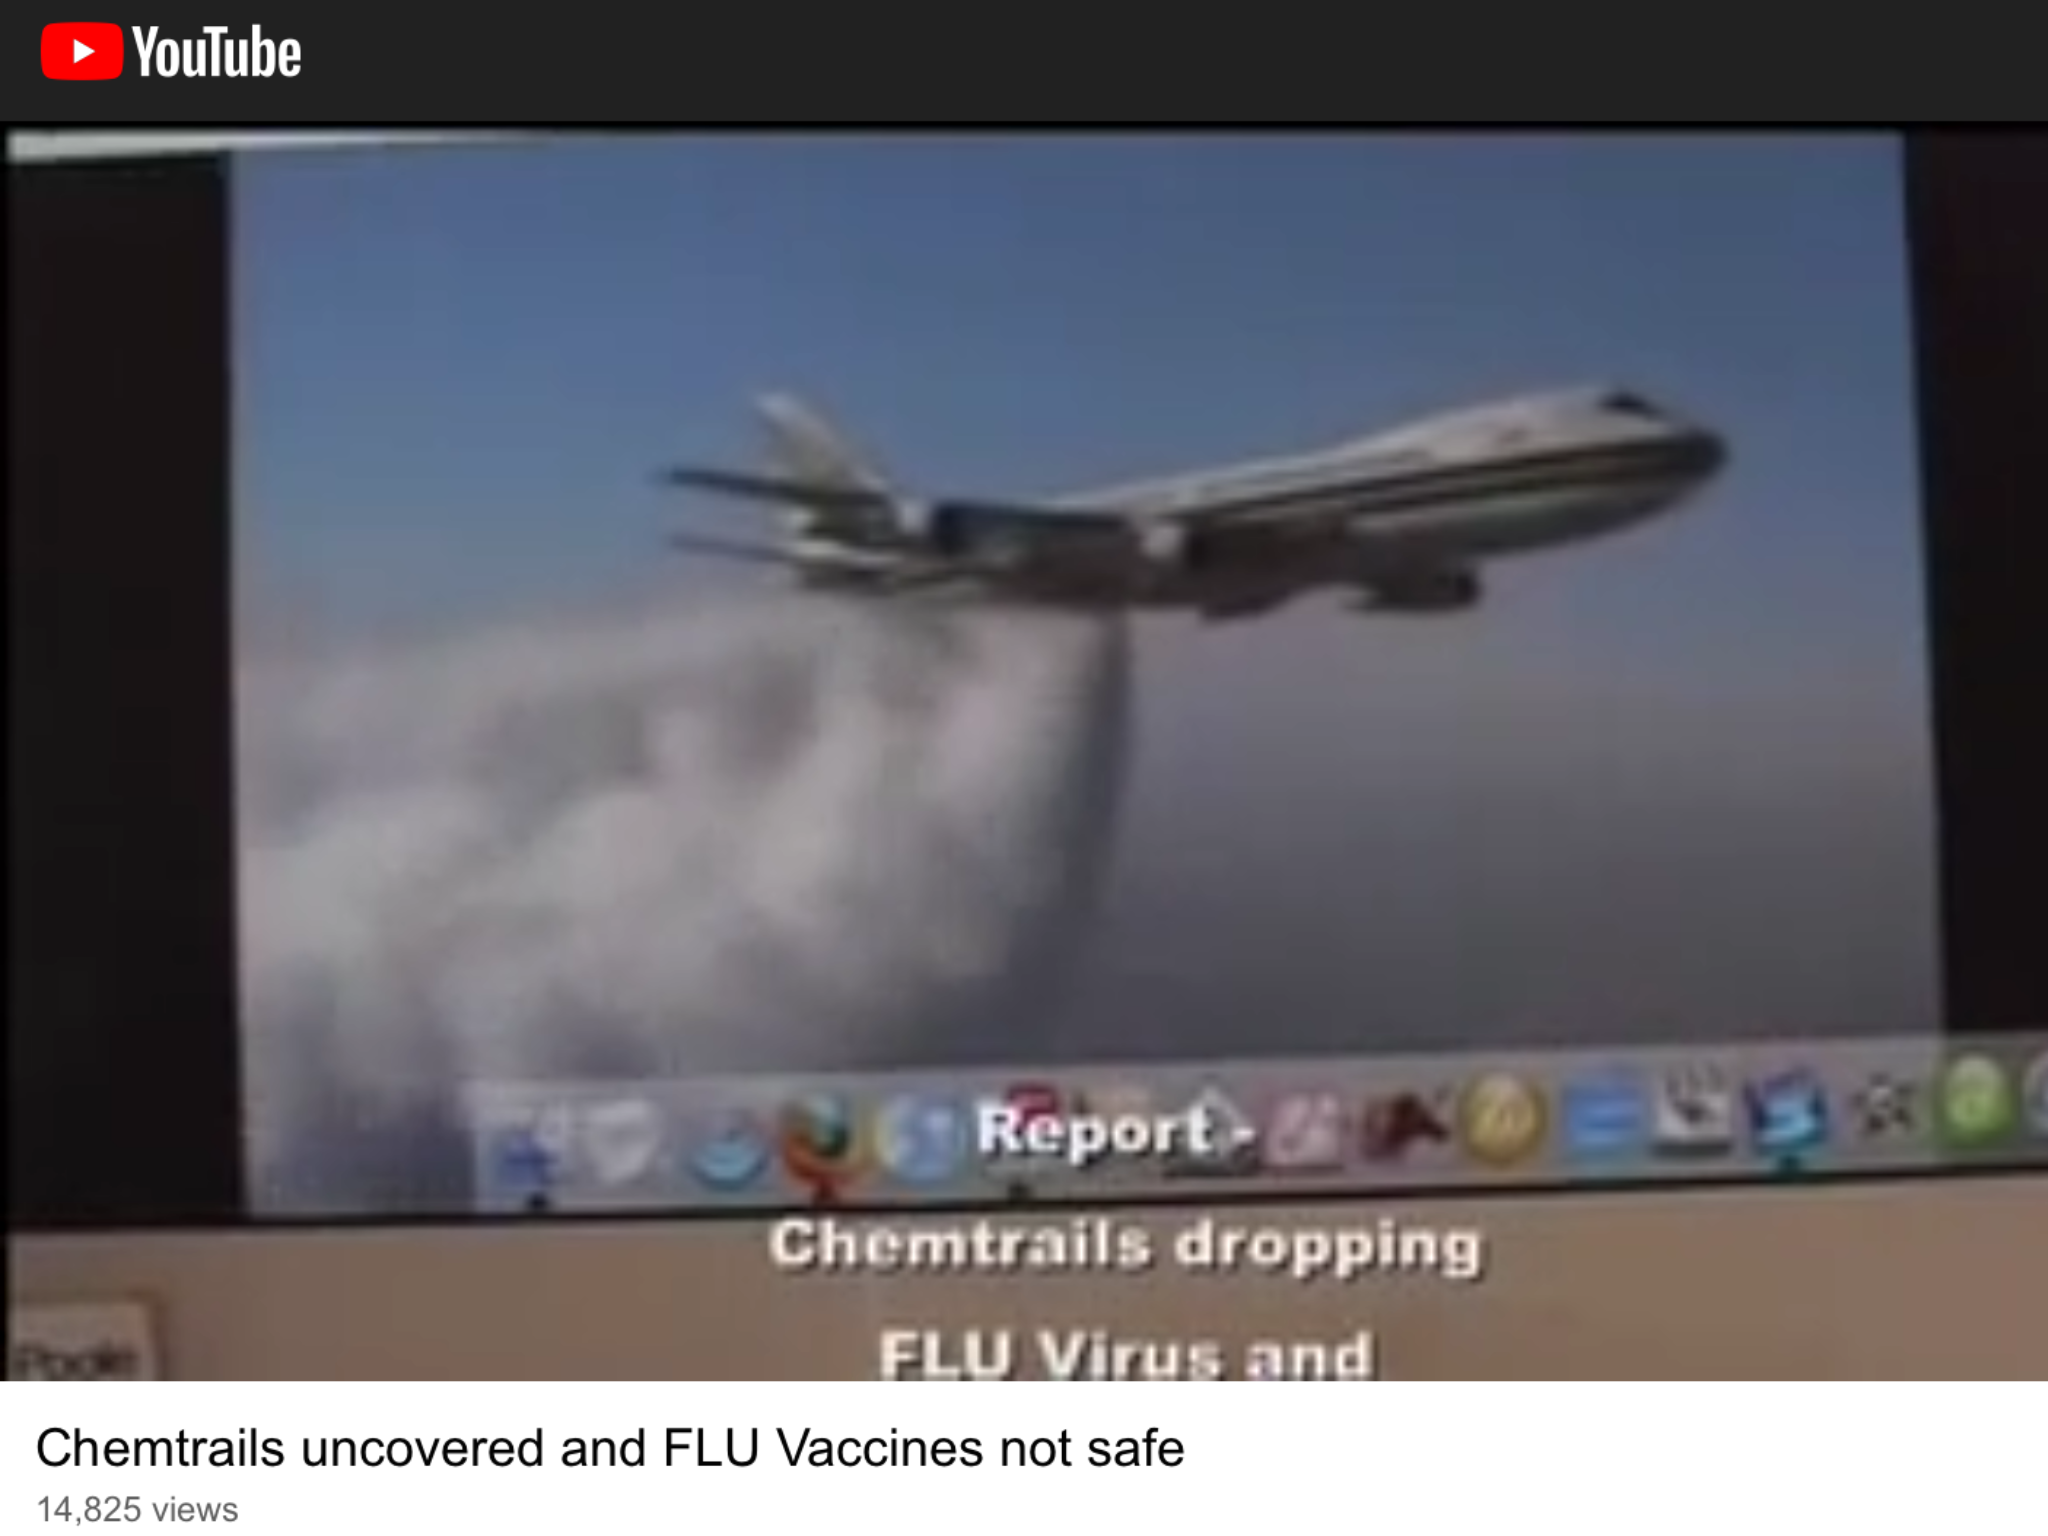 A PLANE PURPOSELY DUMPING VIRUS ON PEOPLE